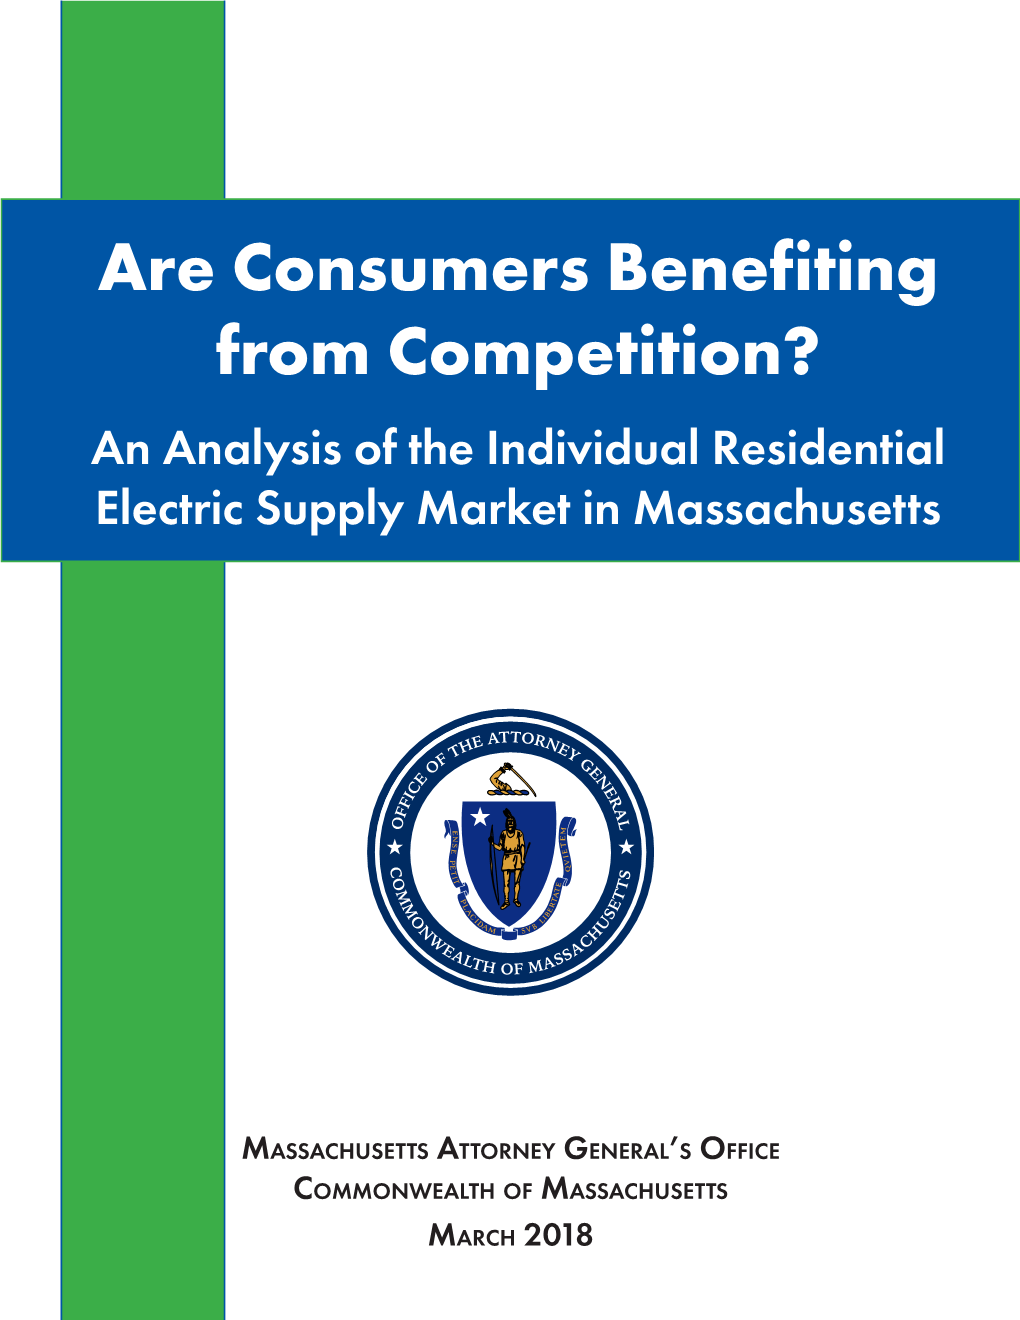 Are Consumers Benefiting from Competition? an Analysis of the Individual Residential Electric Supply Market in Massachusetts